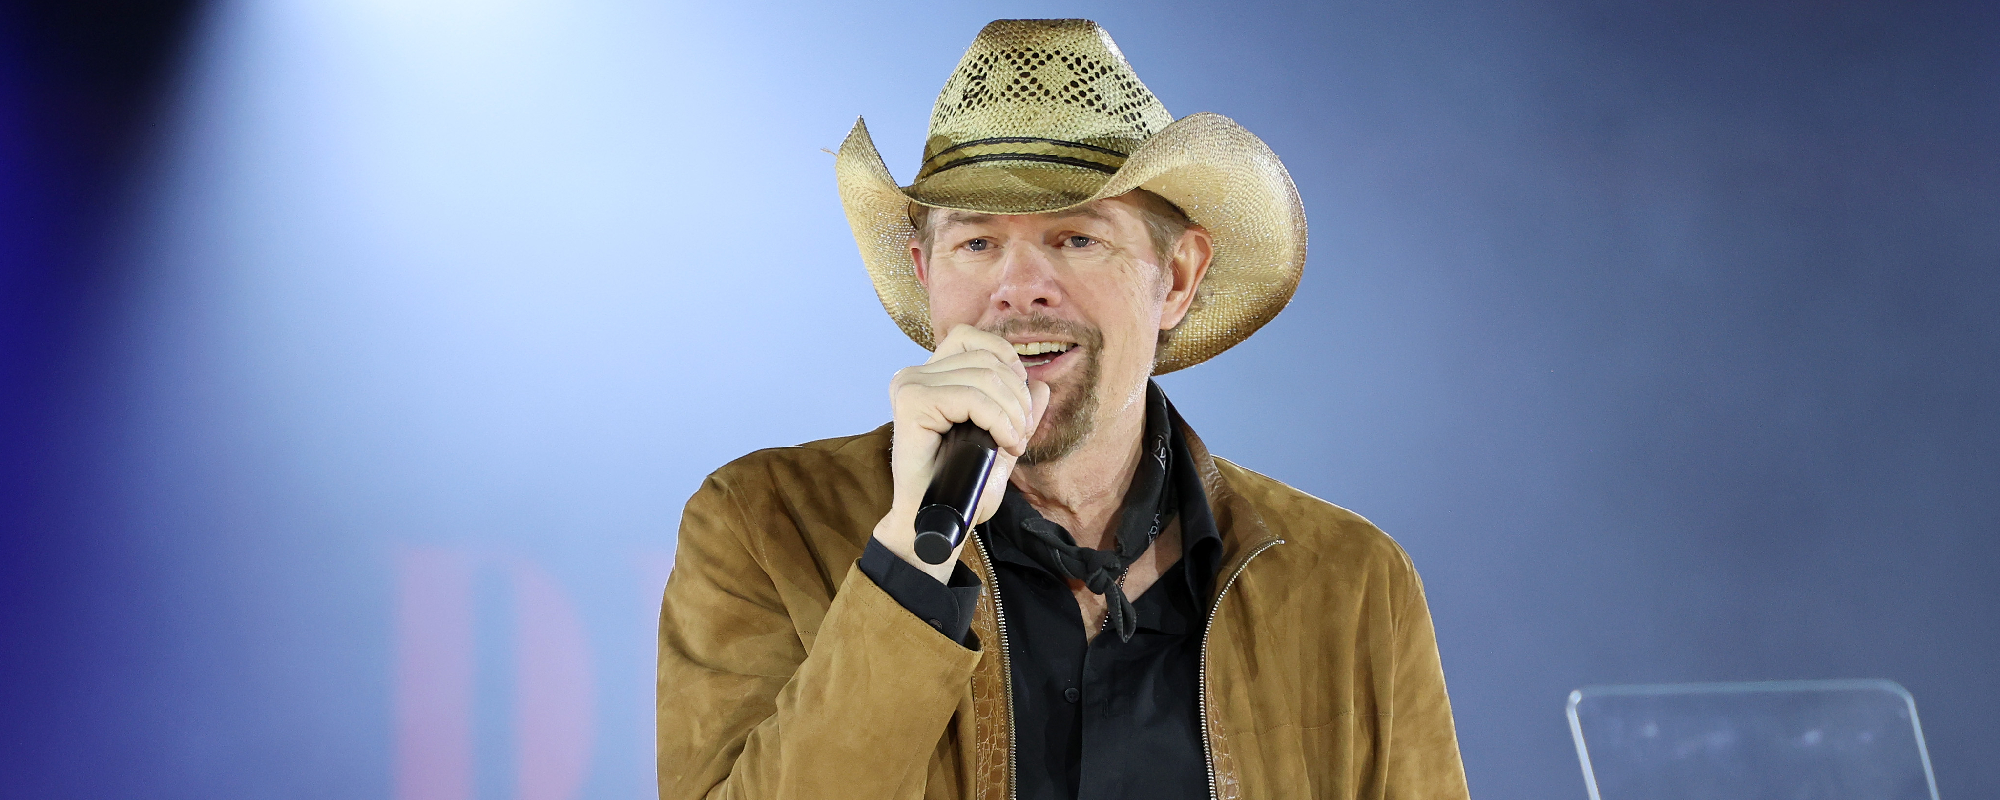 Riley Green, Tracy Lawrence, & Ella Langley Pay Tribute to Toby Keith With “Should’ve Been a Cowboy” Cover